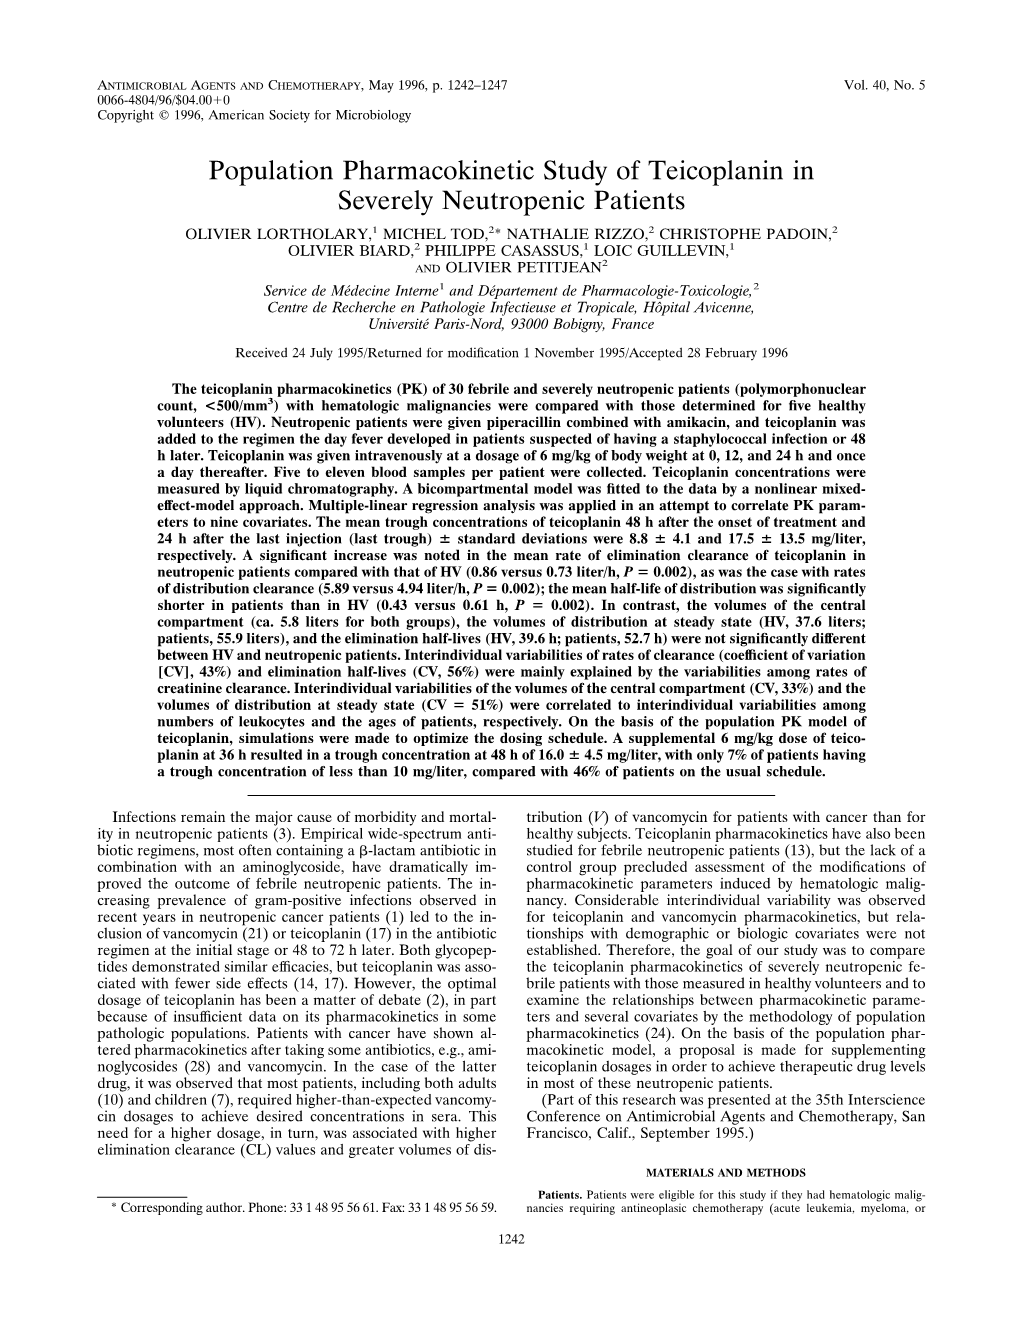 Population Pharmacokinetic Study of Teicoplanin in Severely